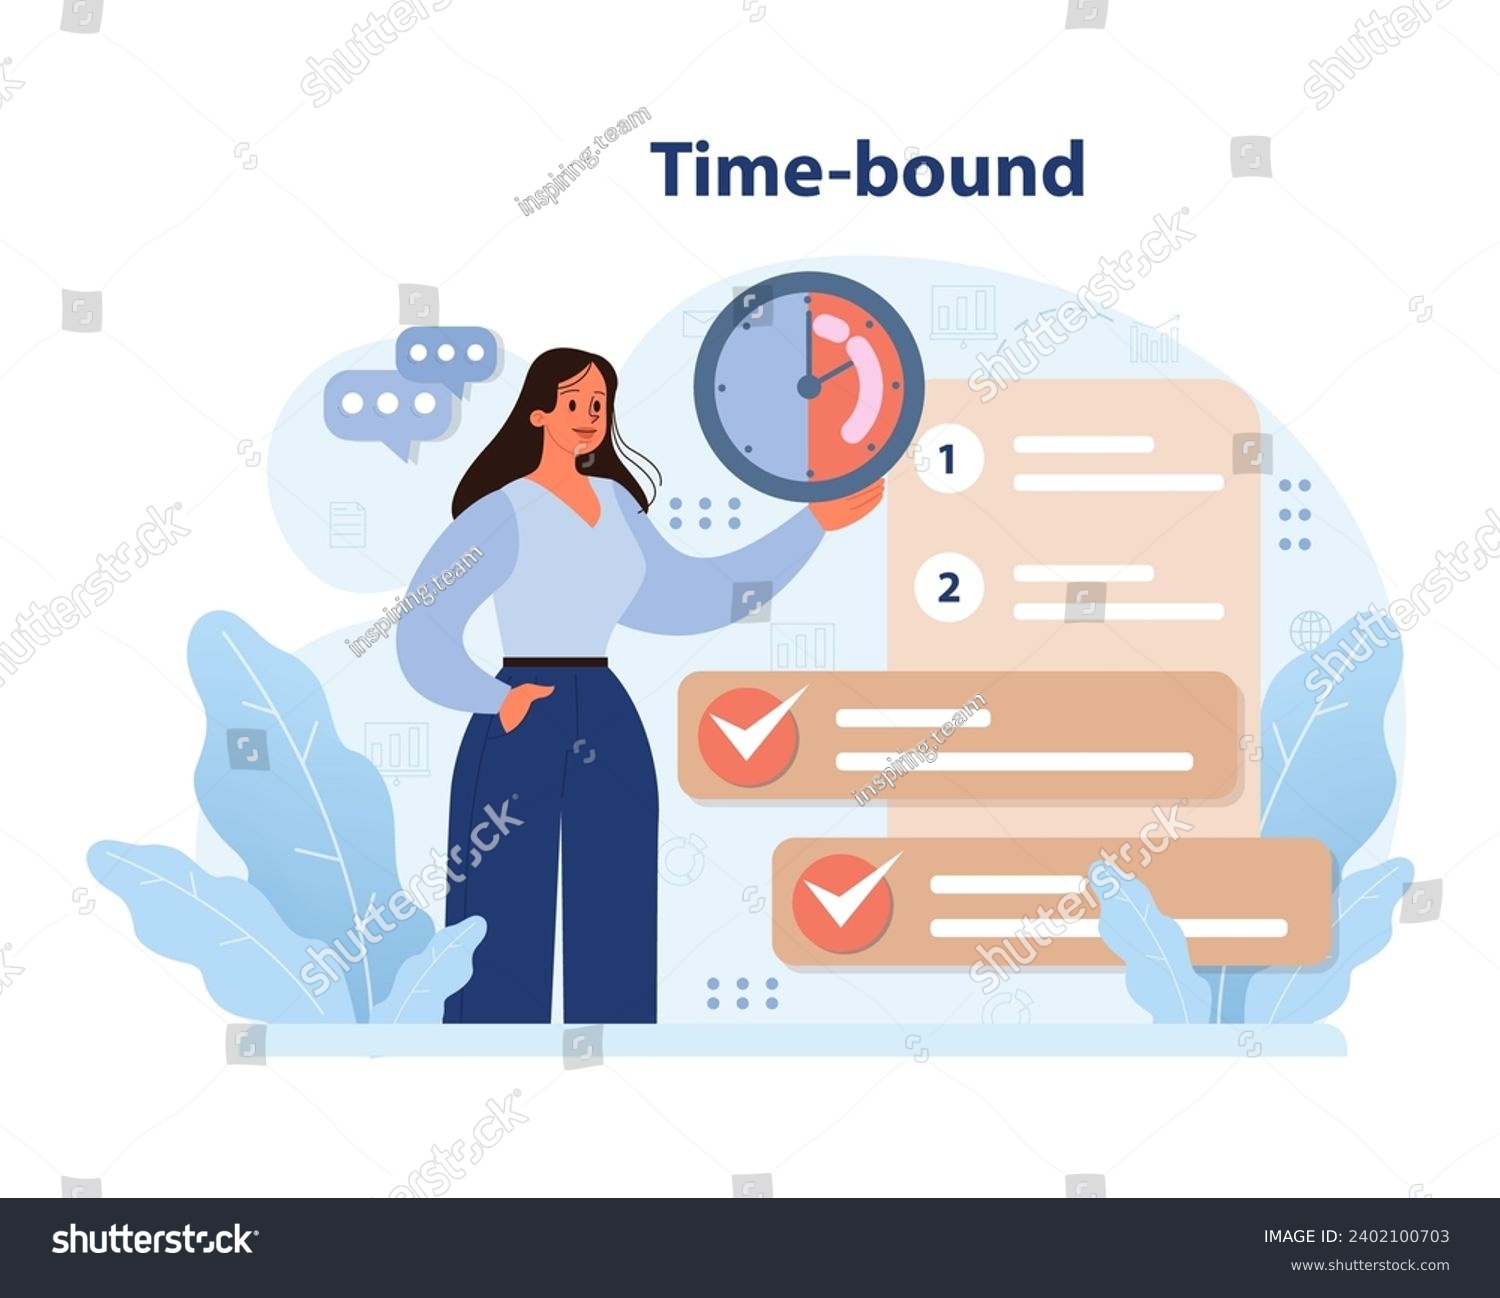 Prioritizing time-bound objectives. Woman with clock emphasizes deadline adherence, checklisted tasks, and punctual project completion. Meeting targets timely, efficient scheduling. Flat vector #2402100703